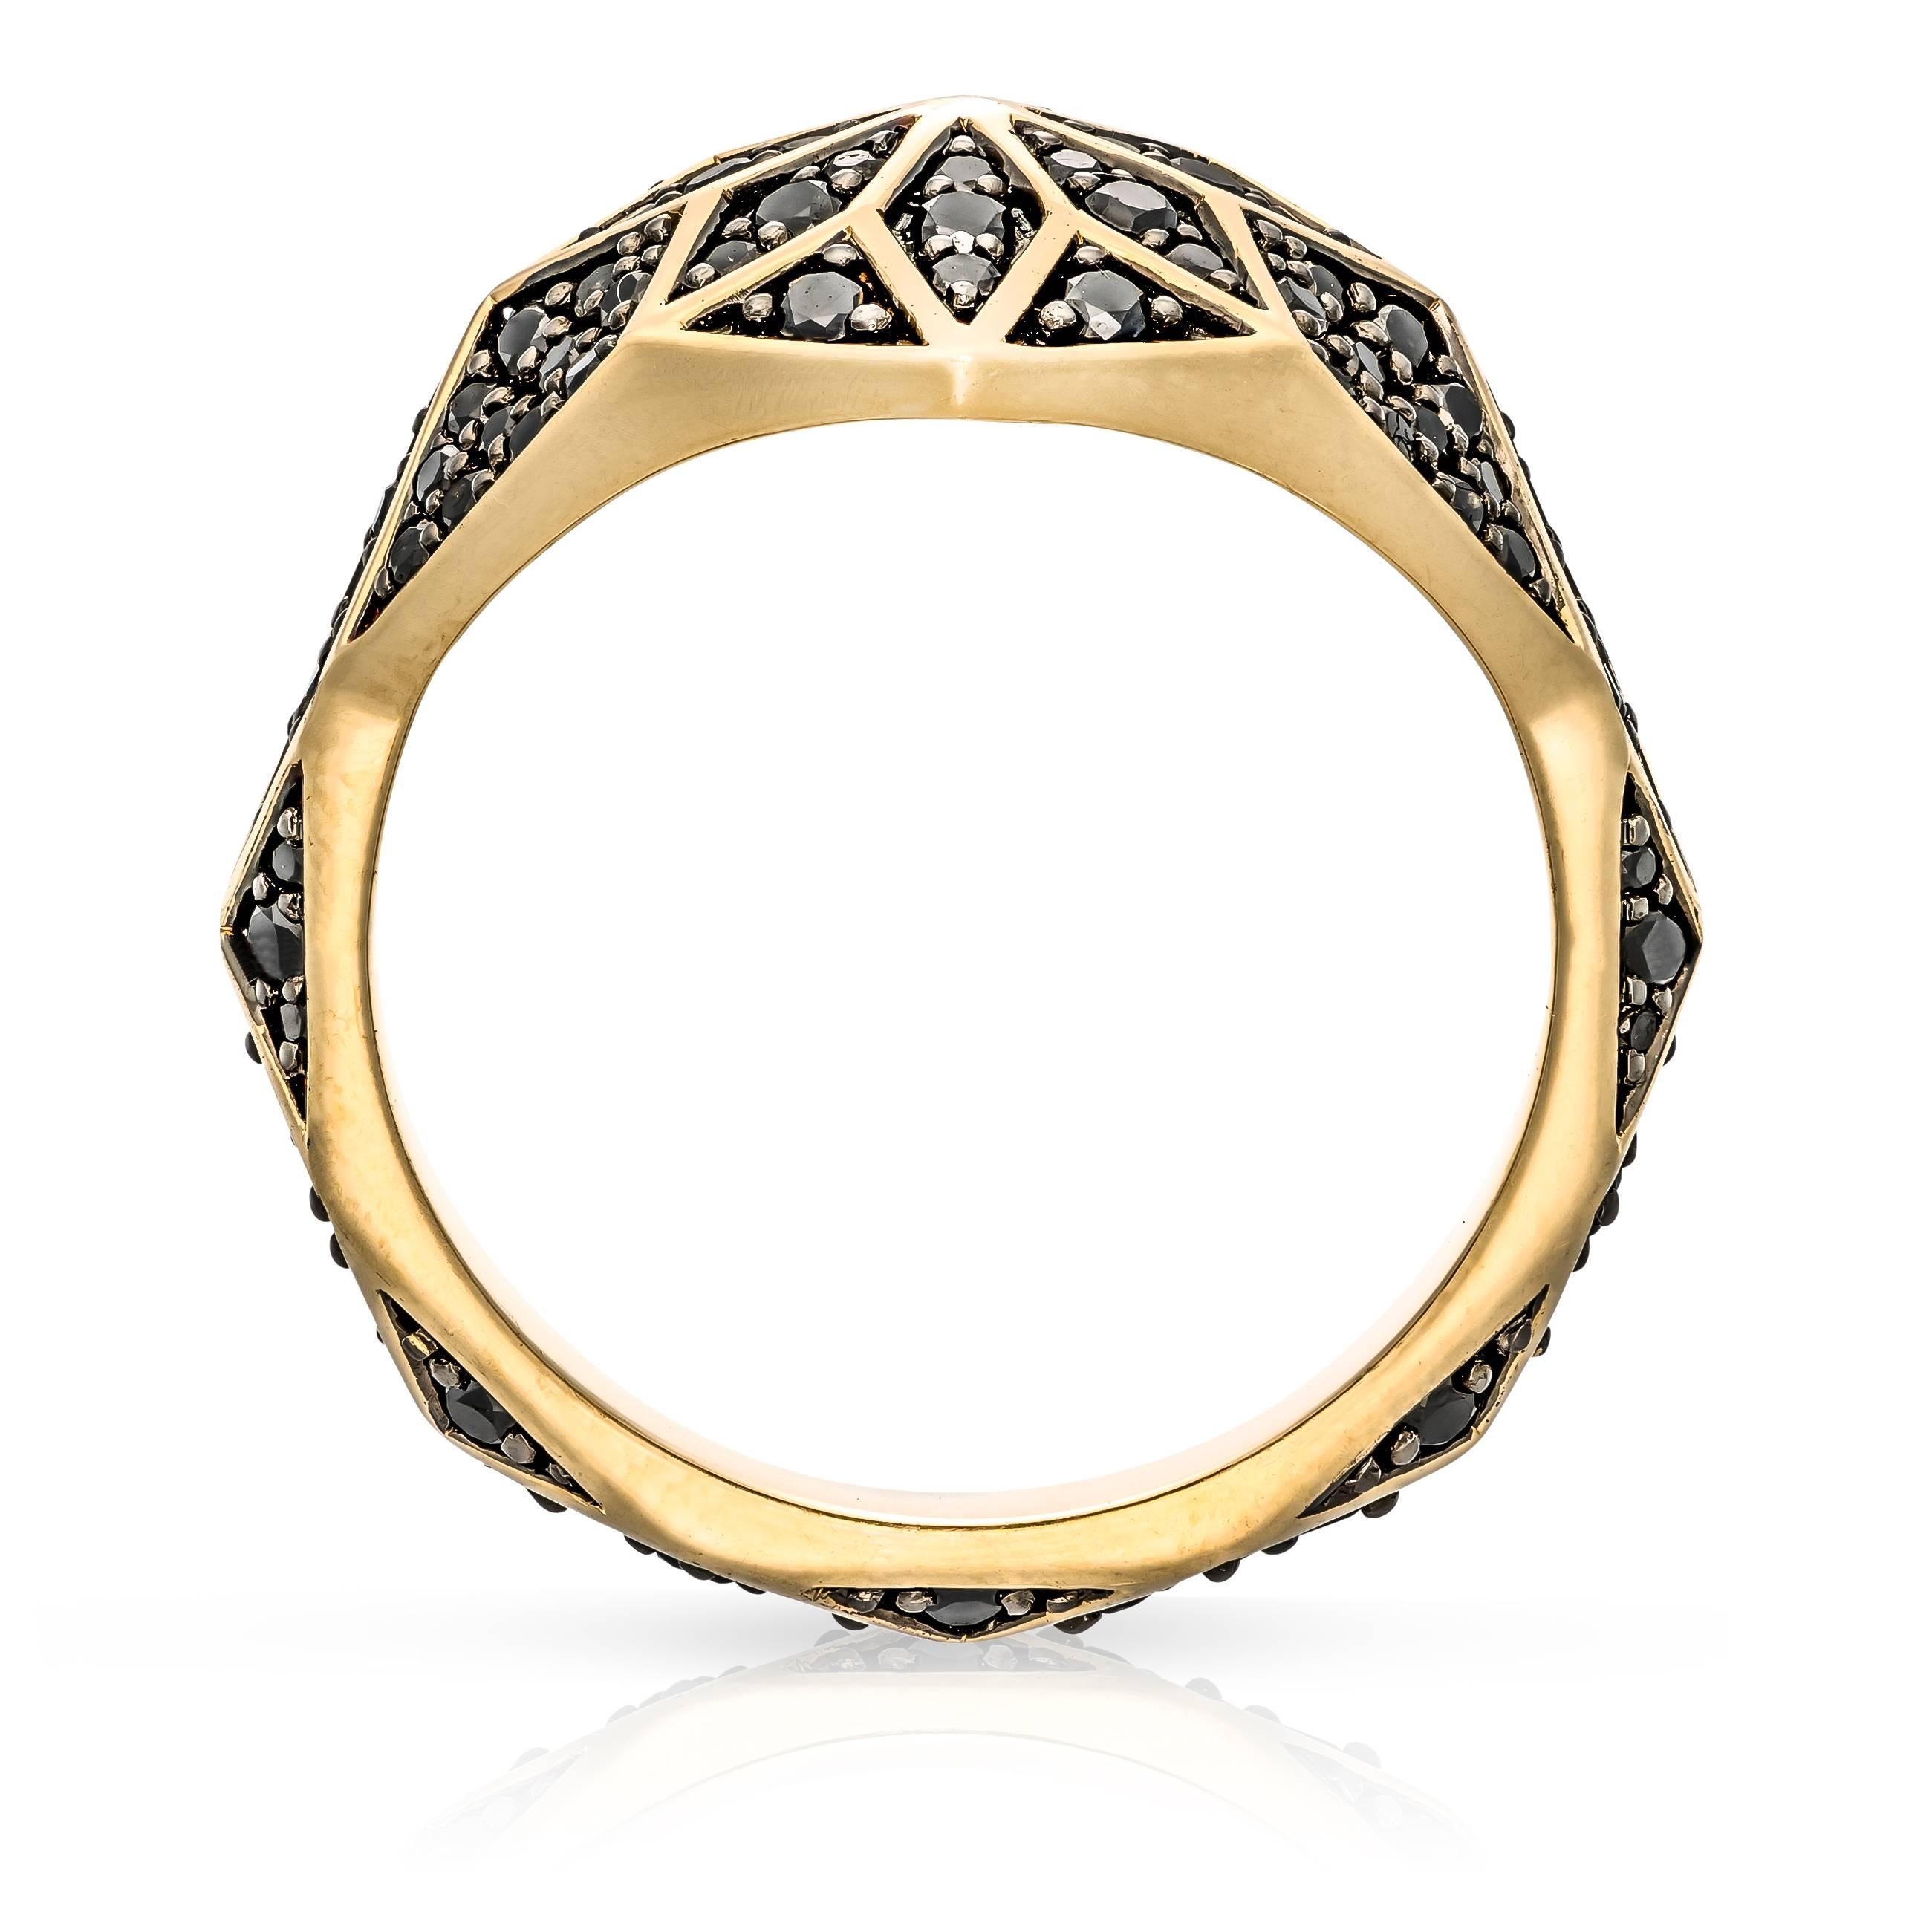 Venus, the goddess of love, was represented by an 8 pointed star. The qualities Venus evokes are heart opening, the bestowing of blessings and the bringing of light.

The Venus Star ring combines the magic of the octagon with the divine light of the